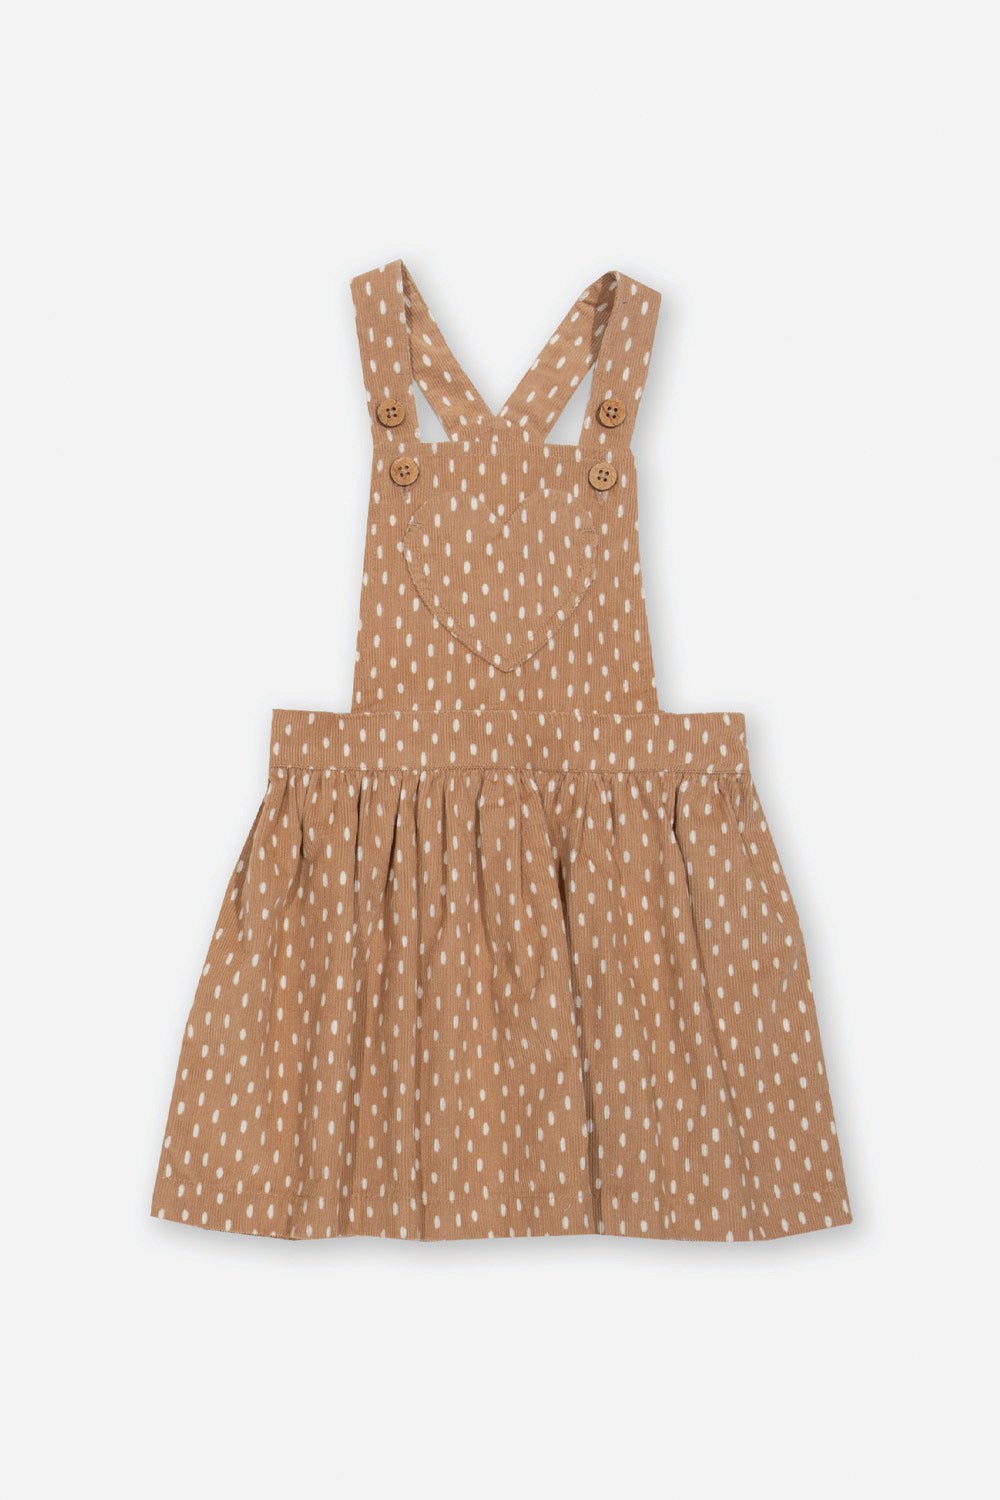 Speckle Baby/Kids Pinafore Dress -